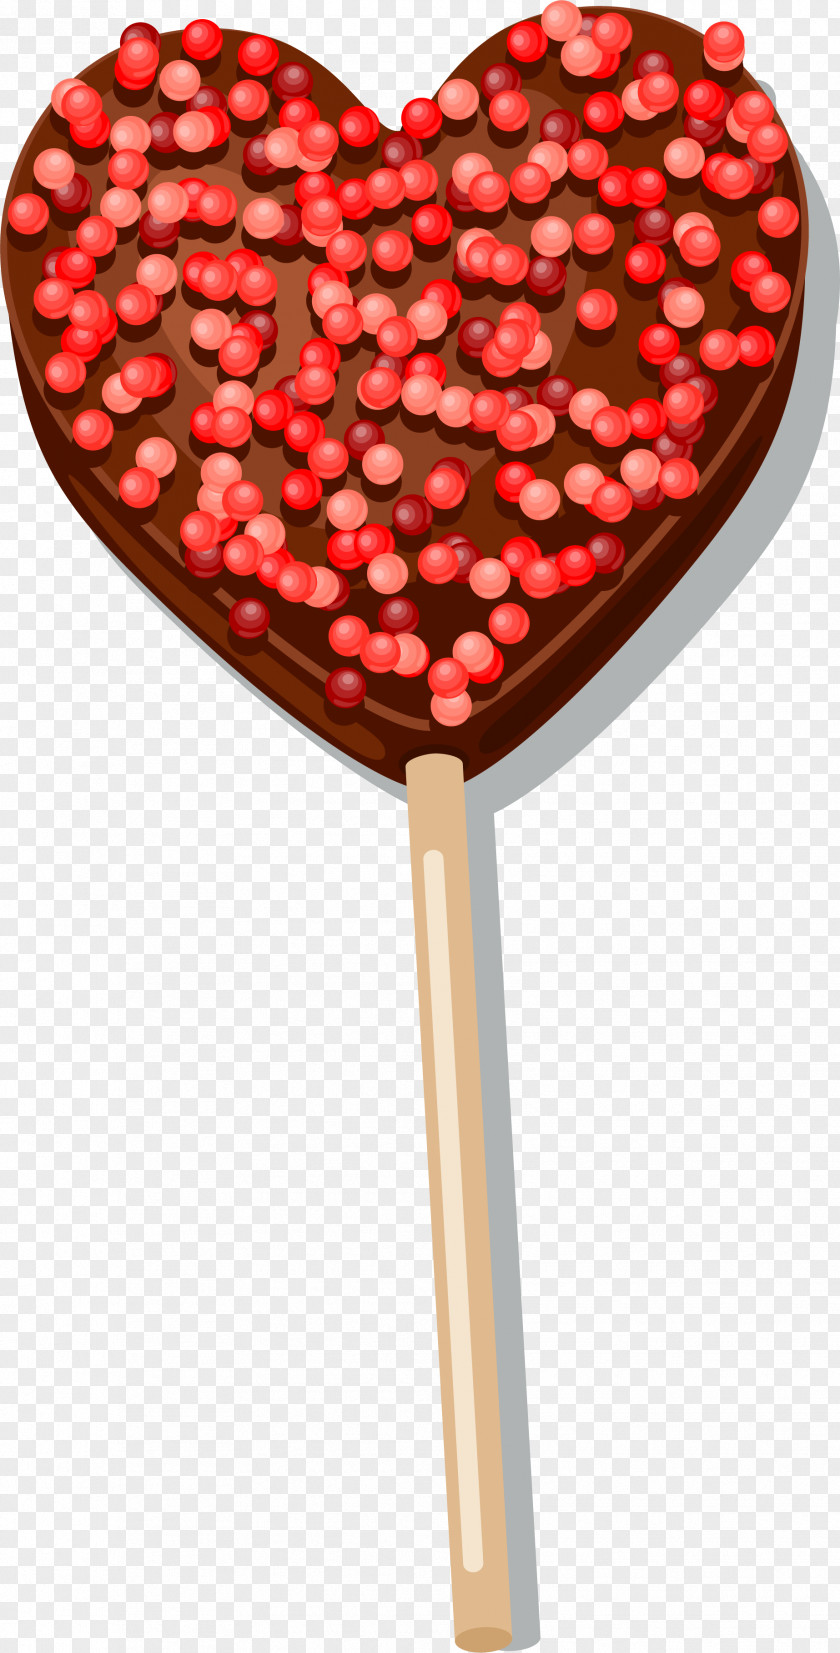 Valentine's Day Chocolate Lollipop Candy PNG